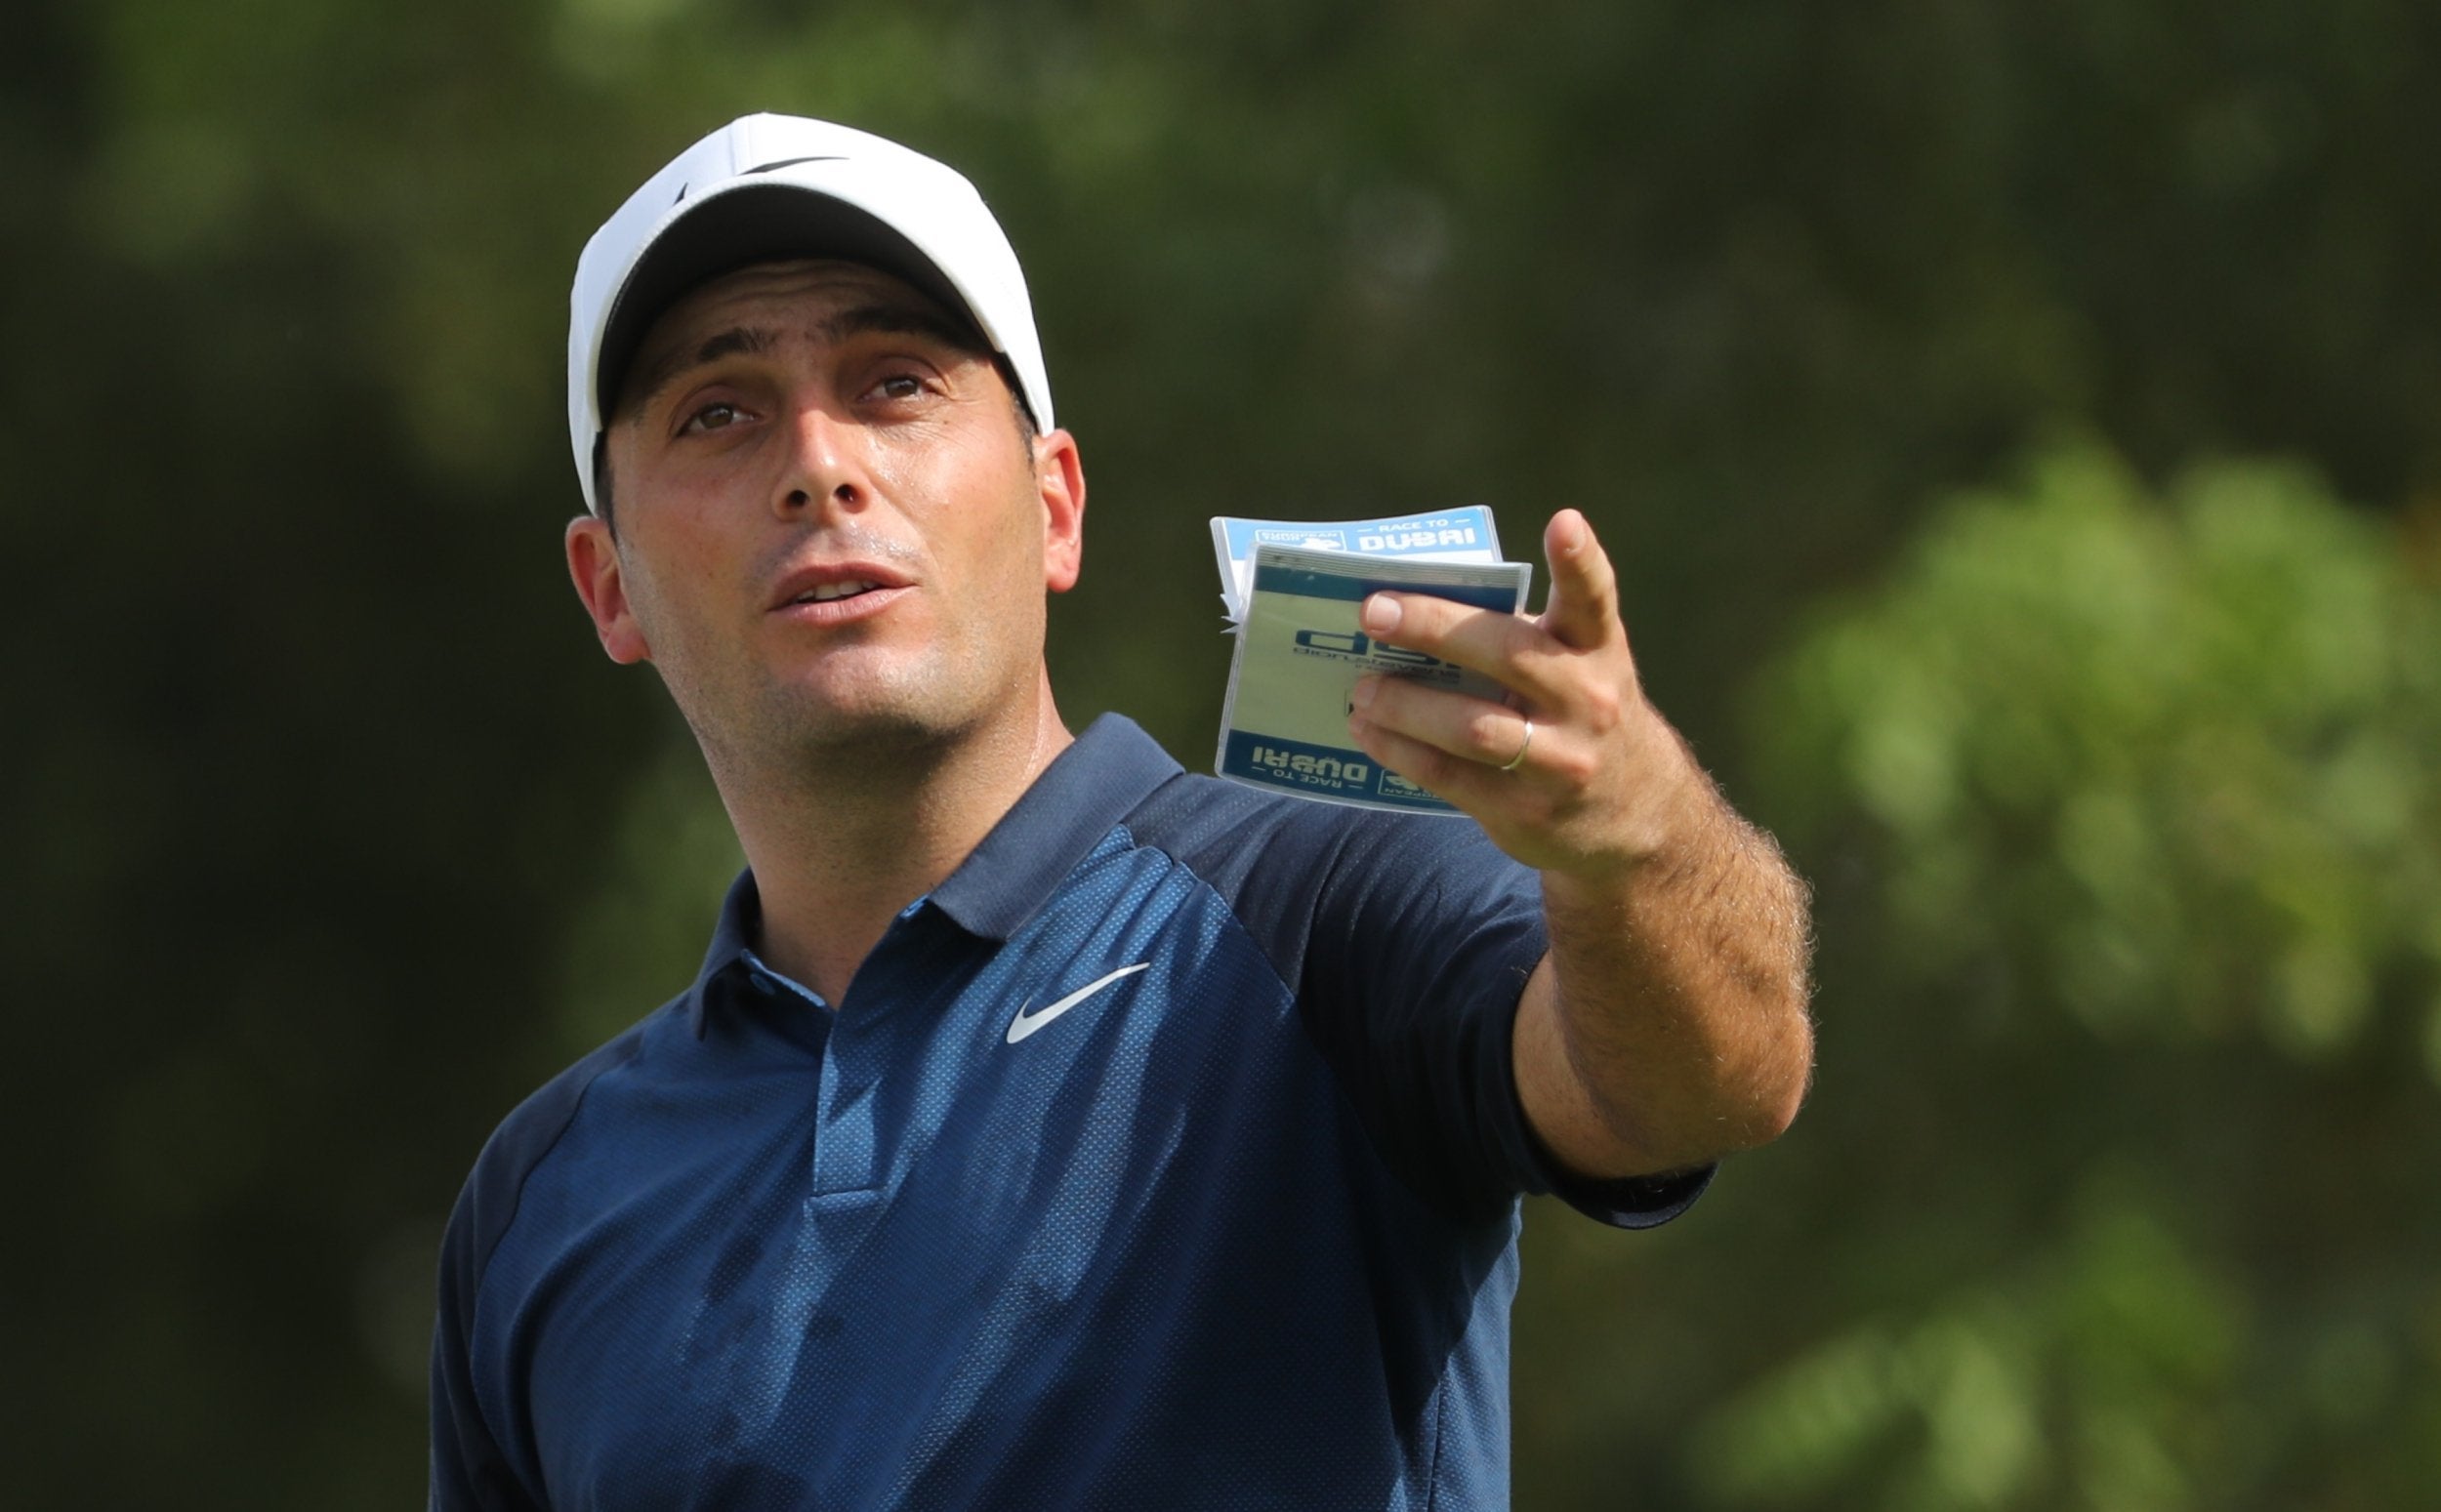 Molinari is set to take the Race to Dubai prize and cap an incredible year